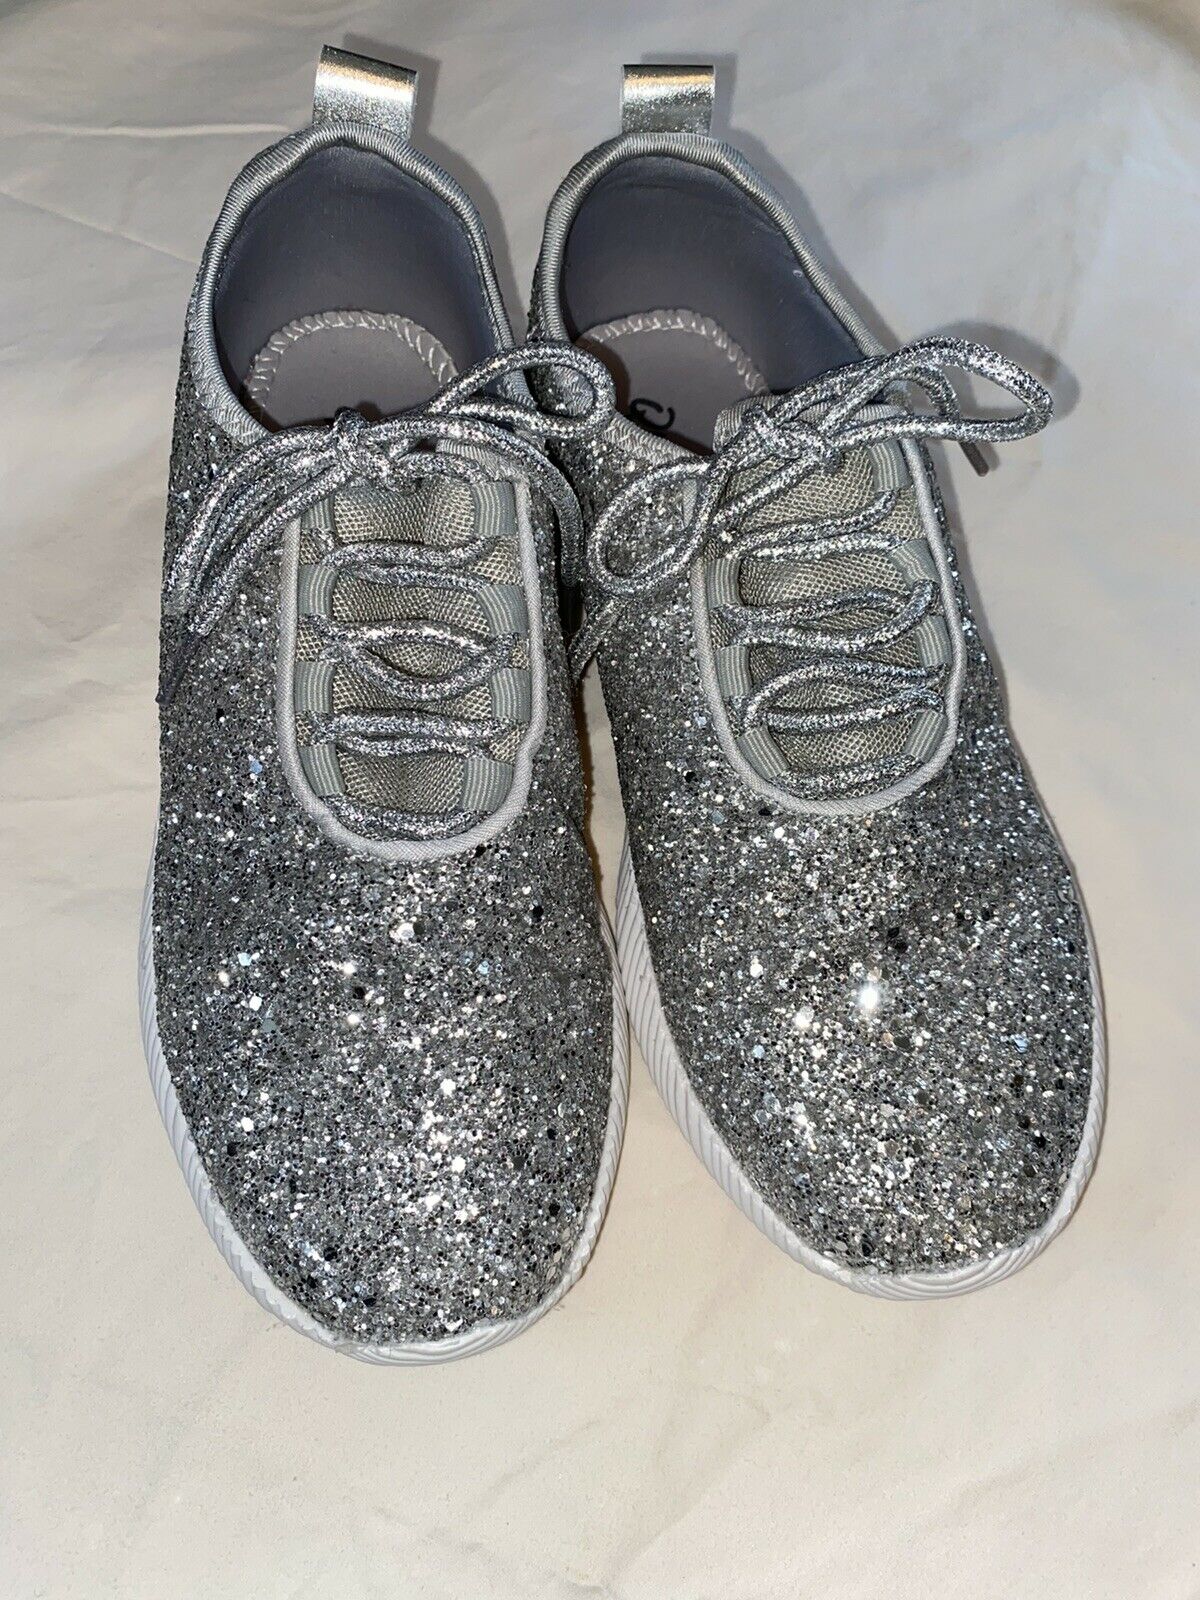 Women’s Silver Glitter Sneakers Size 7 Shoes By Qupid - Gently Worn